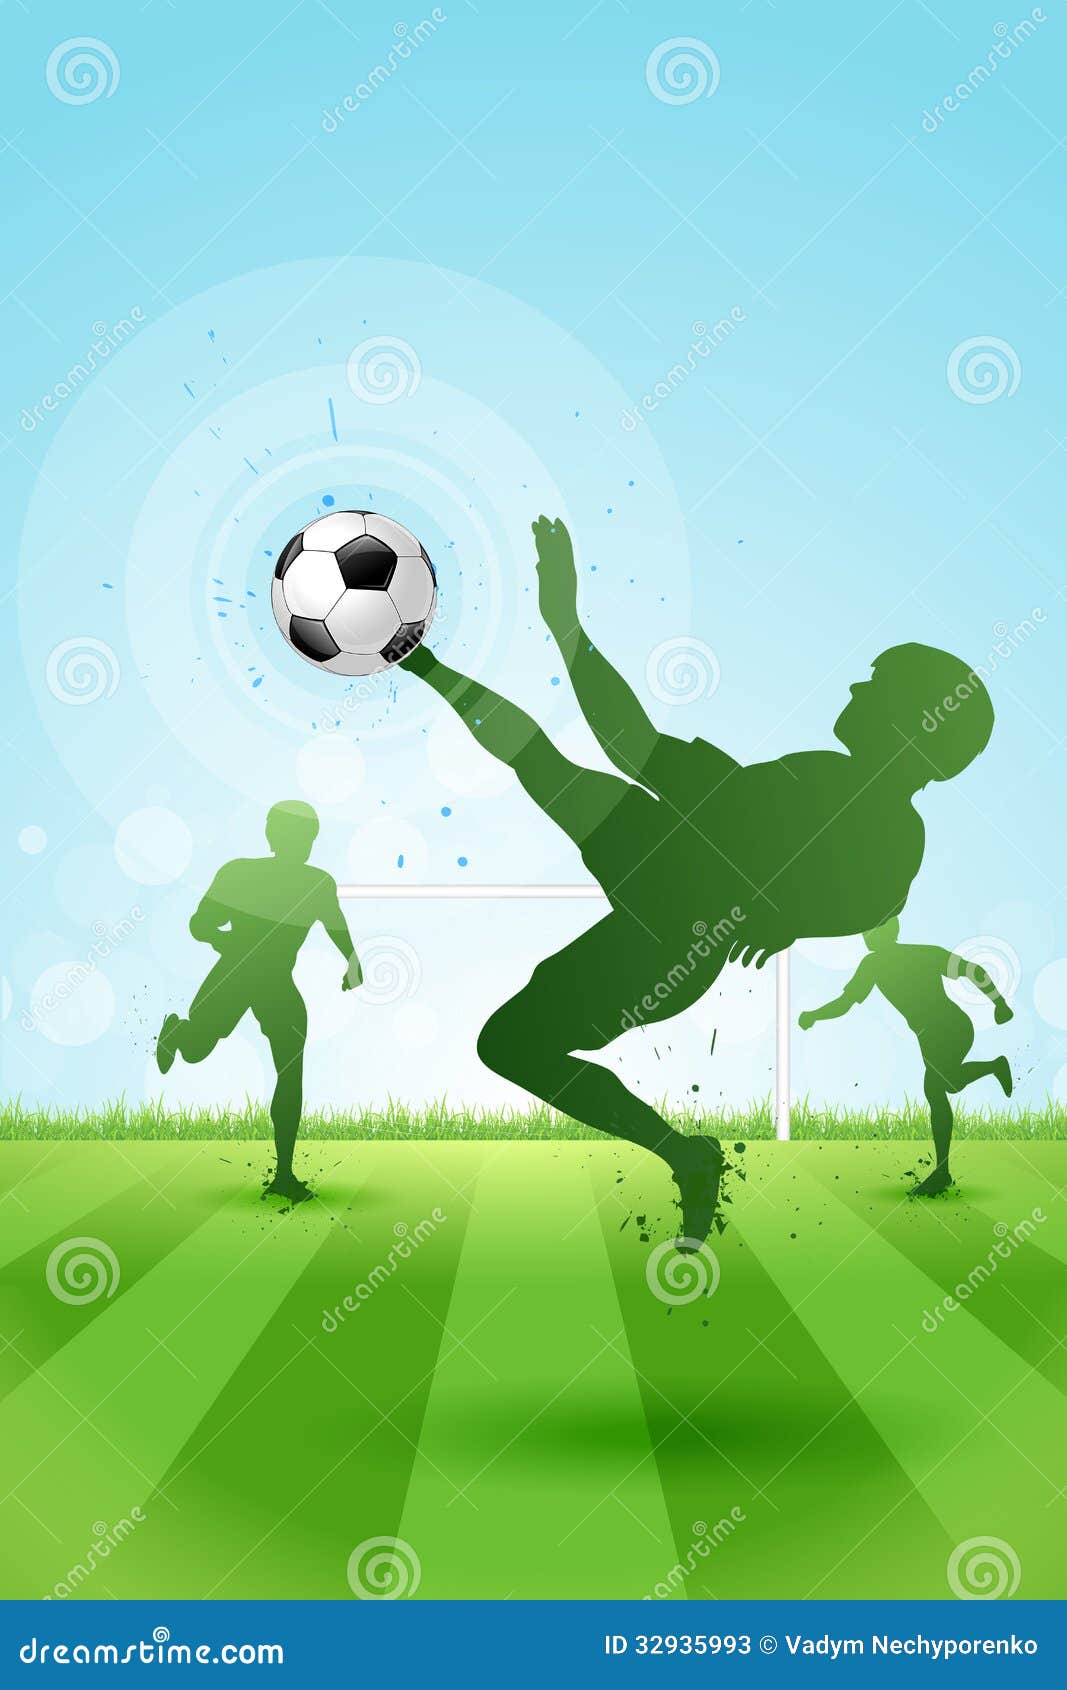 Soccer Background With Three Players Stock Vector - Illustration: 32935993